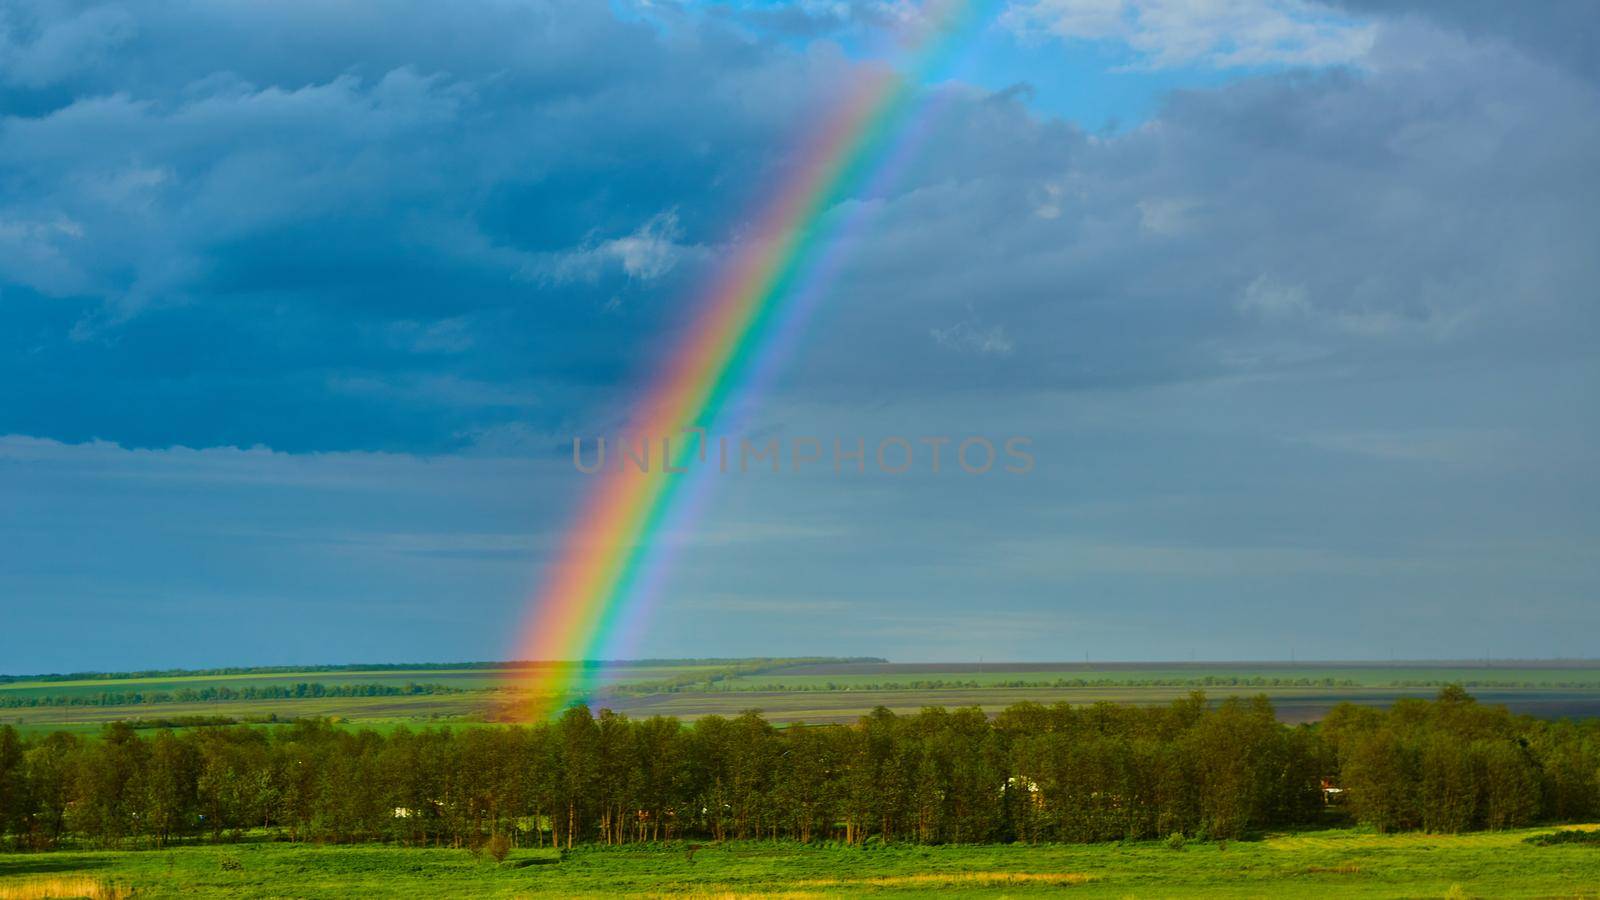 The Rainbow over Rural Landscape after Thunderstorm. by sarymsakov